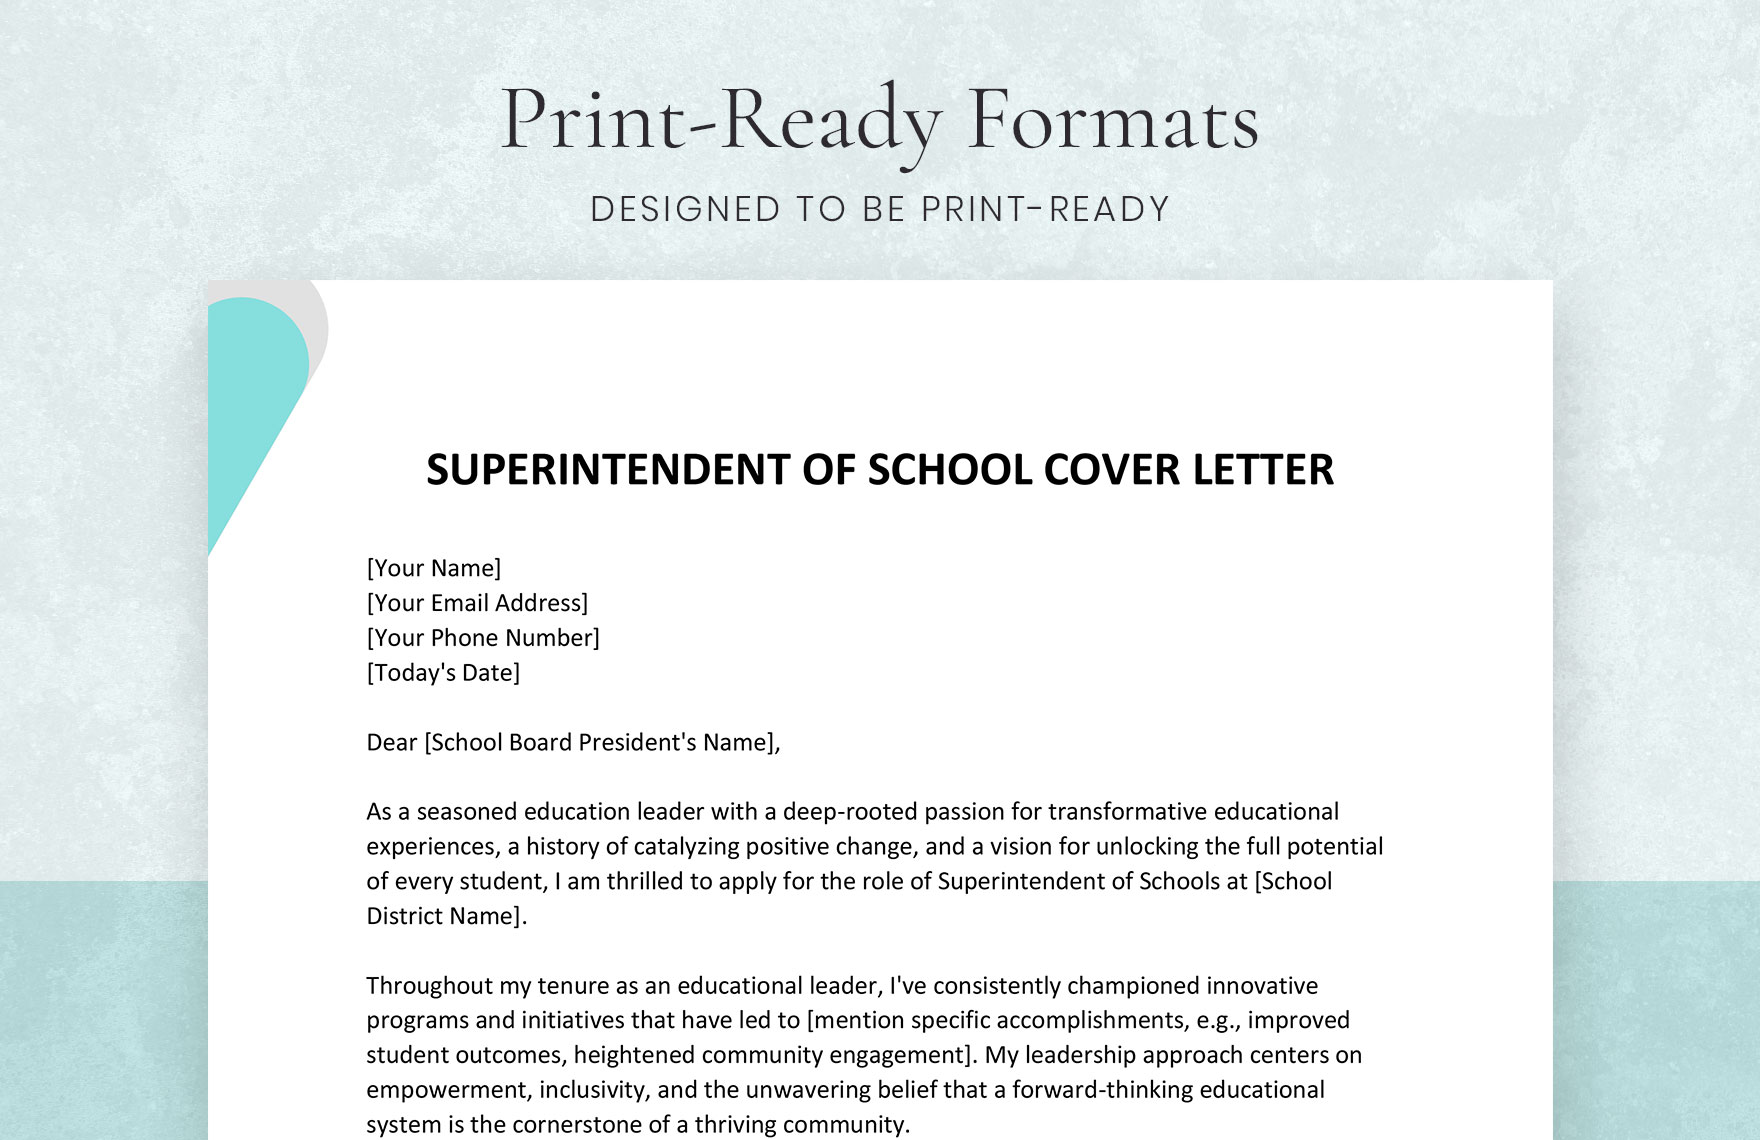 Superintendent of School Cover Letter